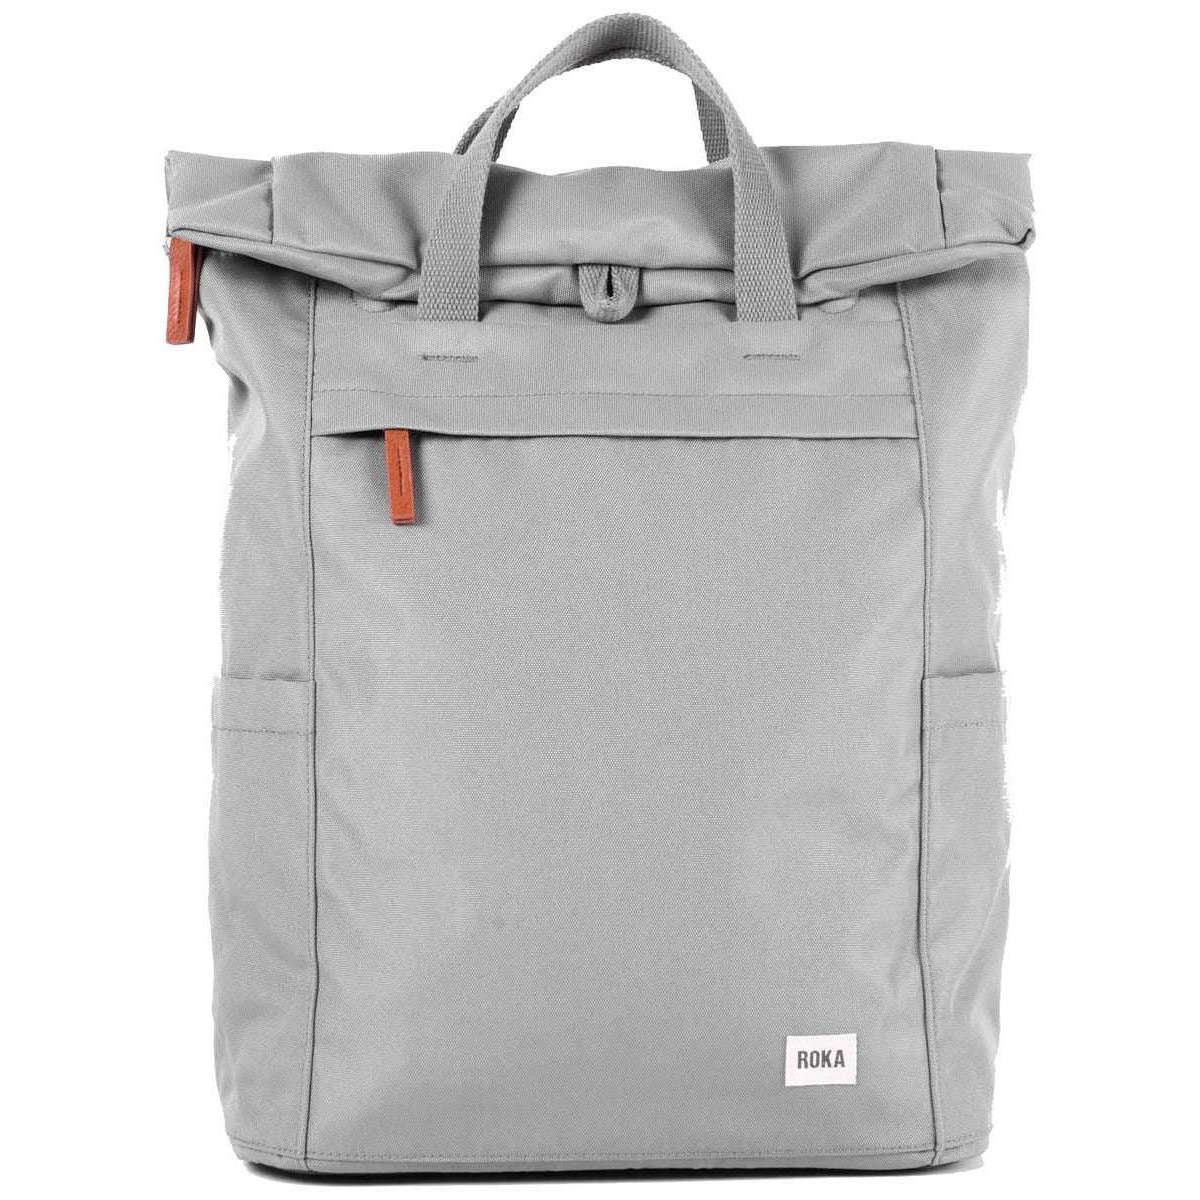 Roka Finchley A Large Sustainable Canvas Backpack - Stormy Grey